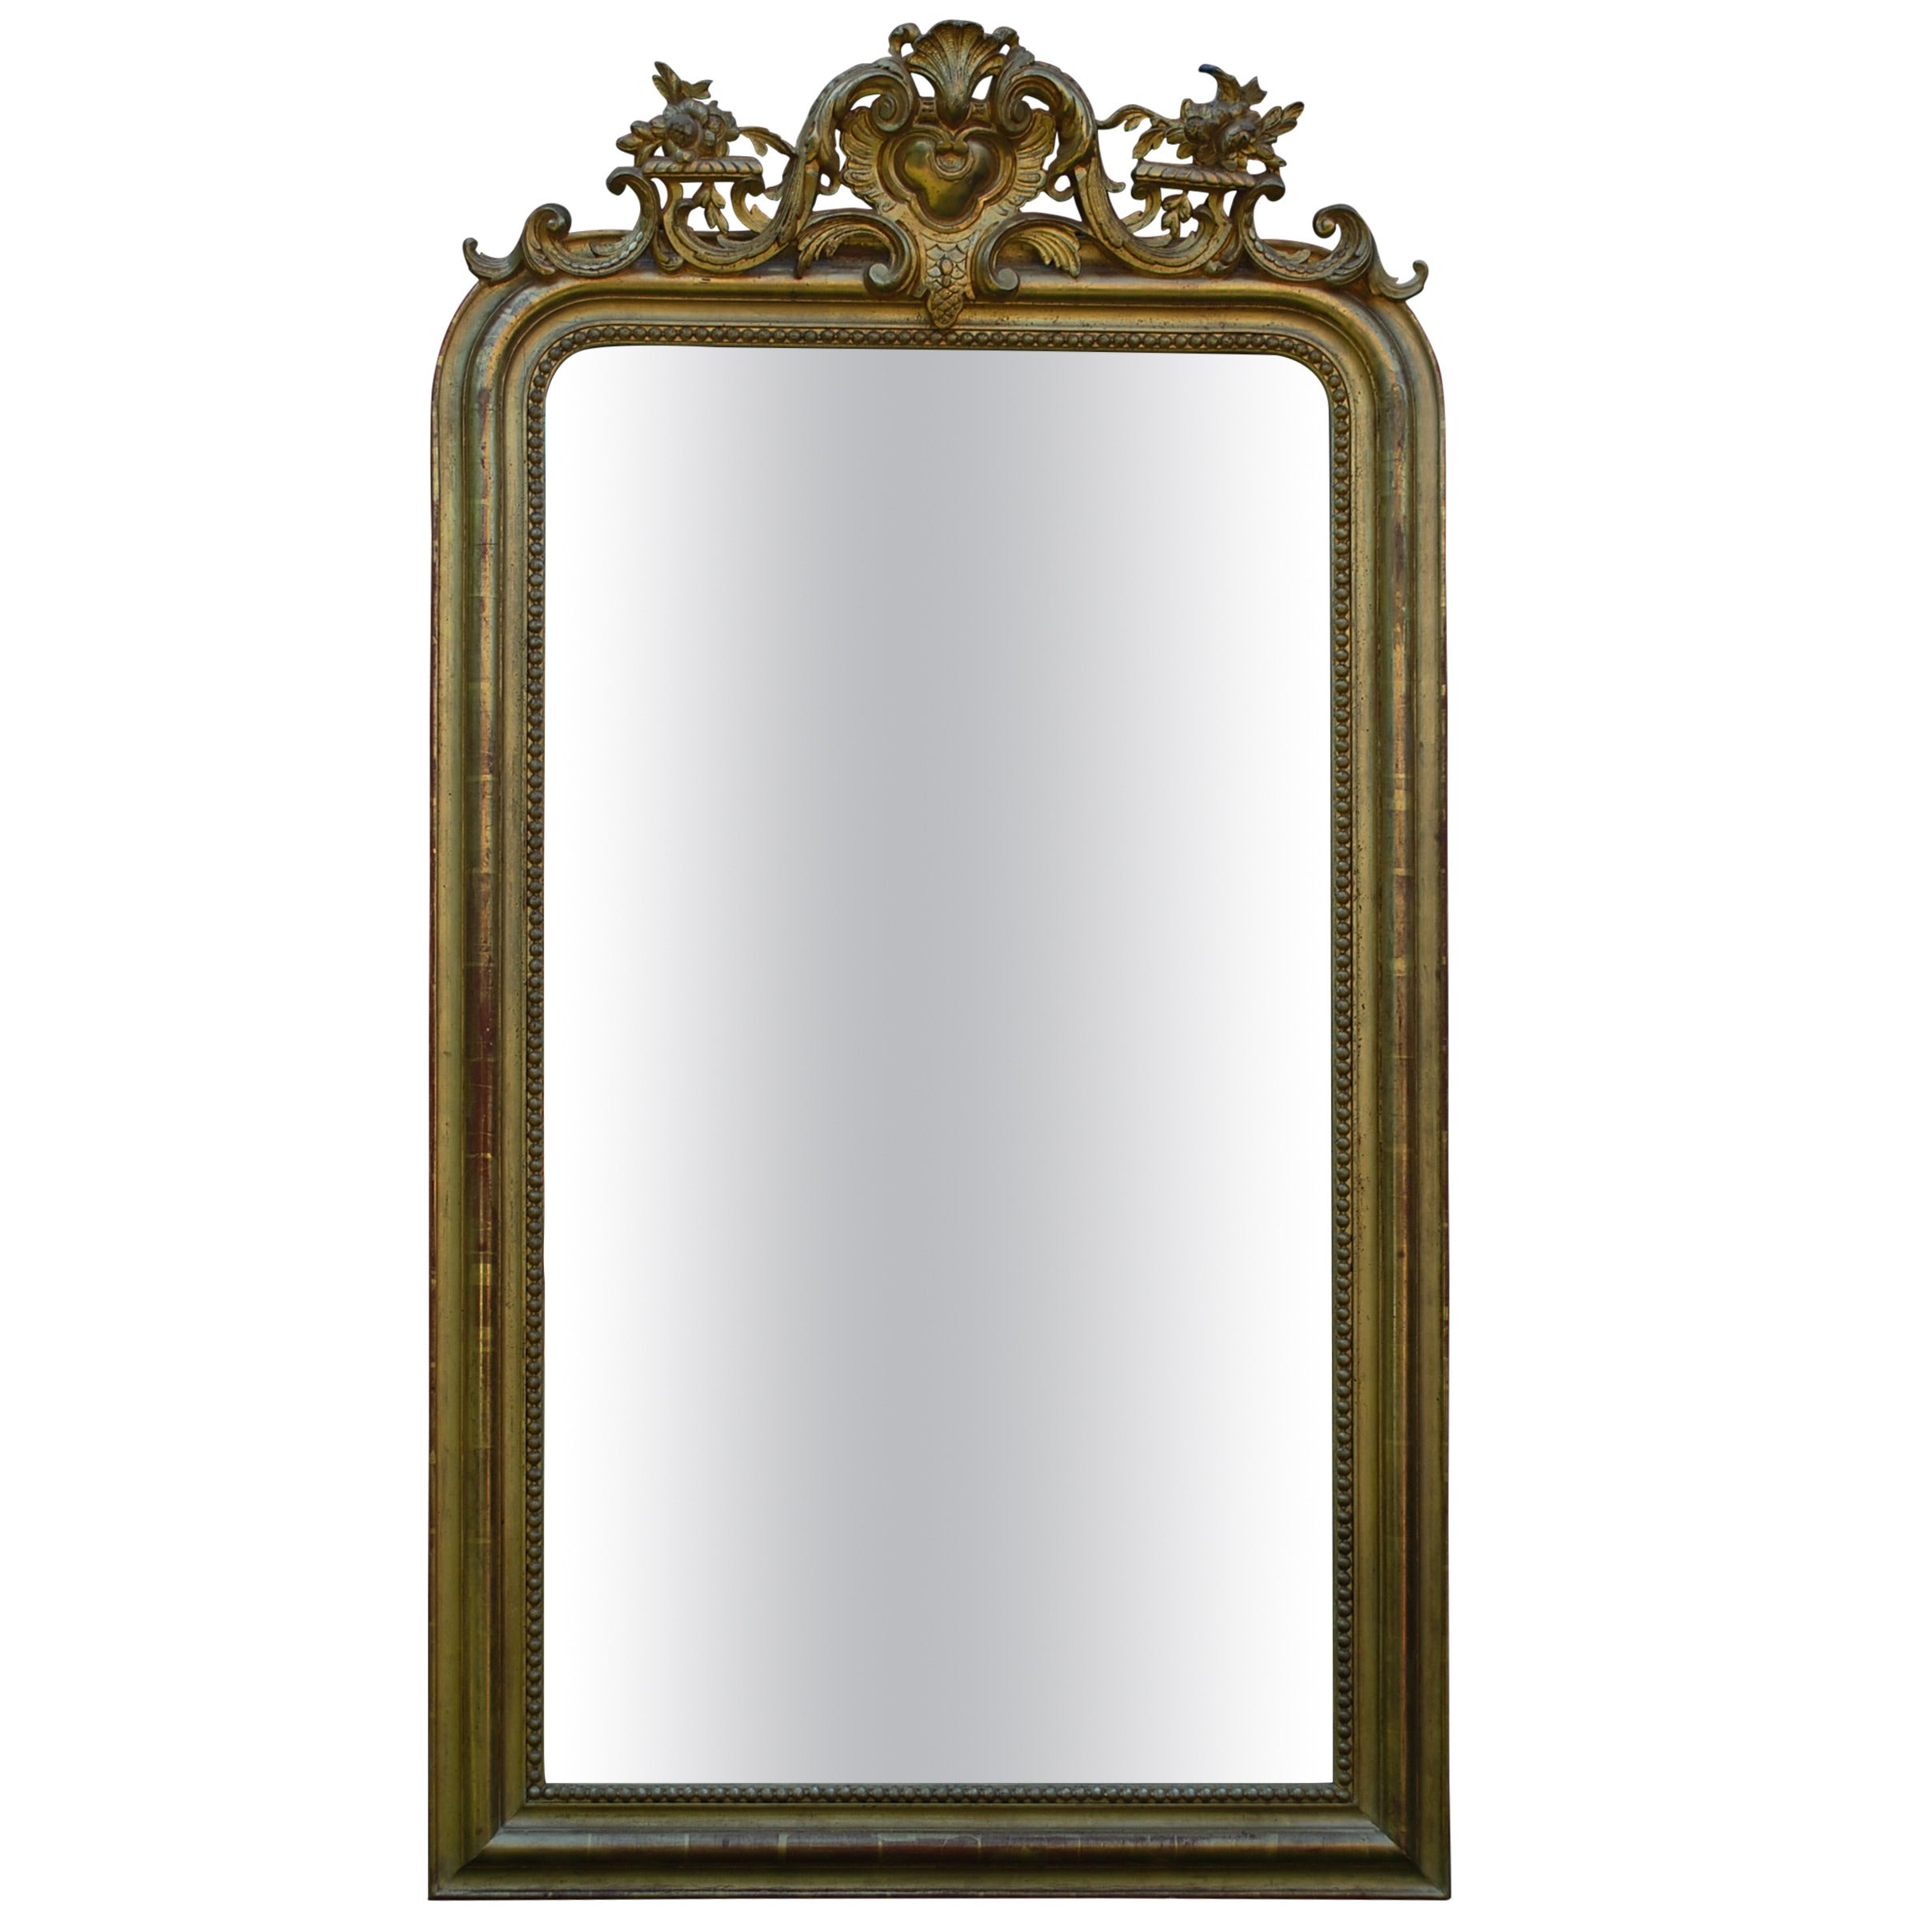 19th century antique French gold gilt Louis Philippe mirror with crest